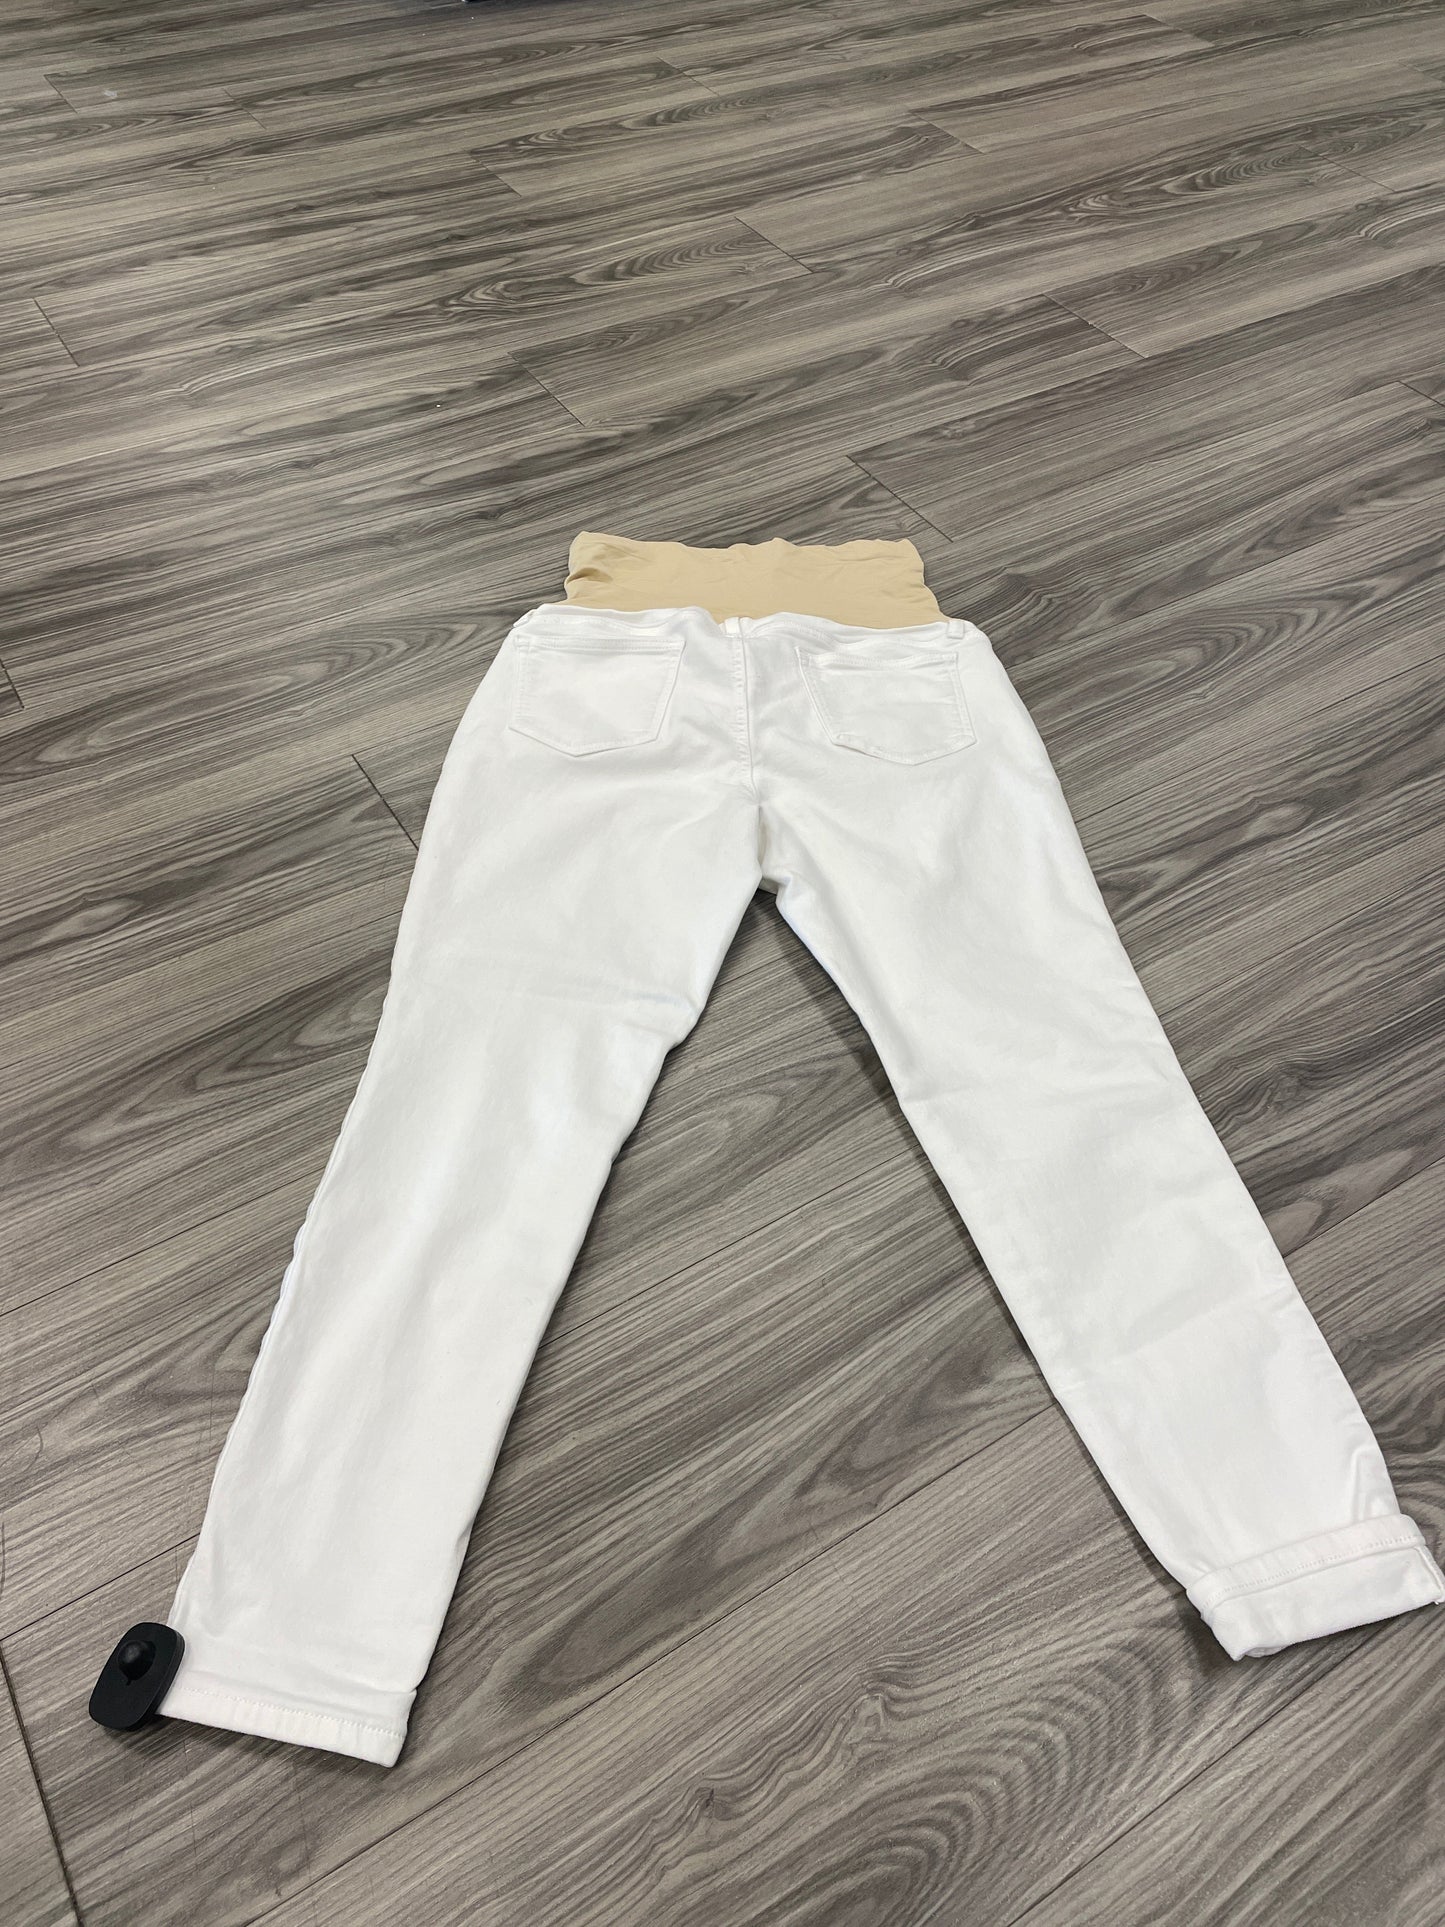 Maternity Jeans By A Glow  Size: 14